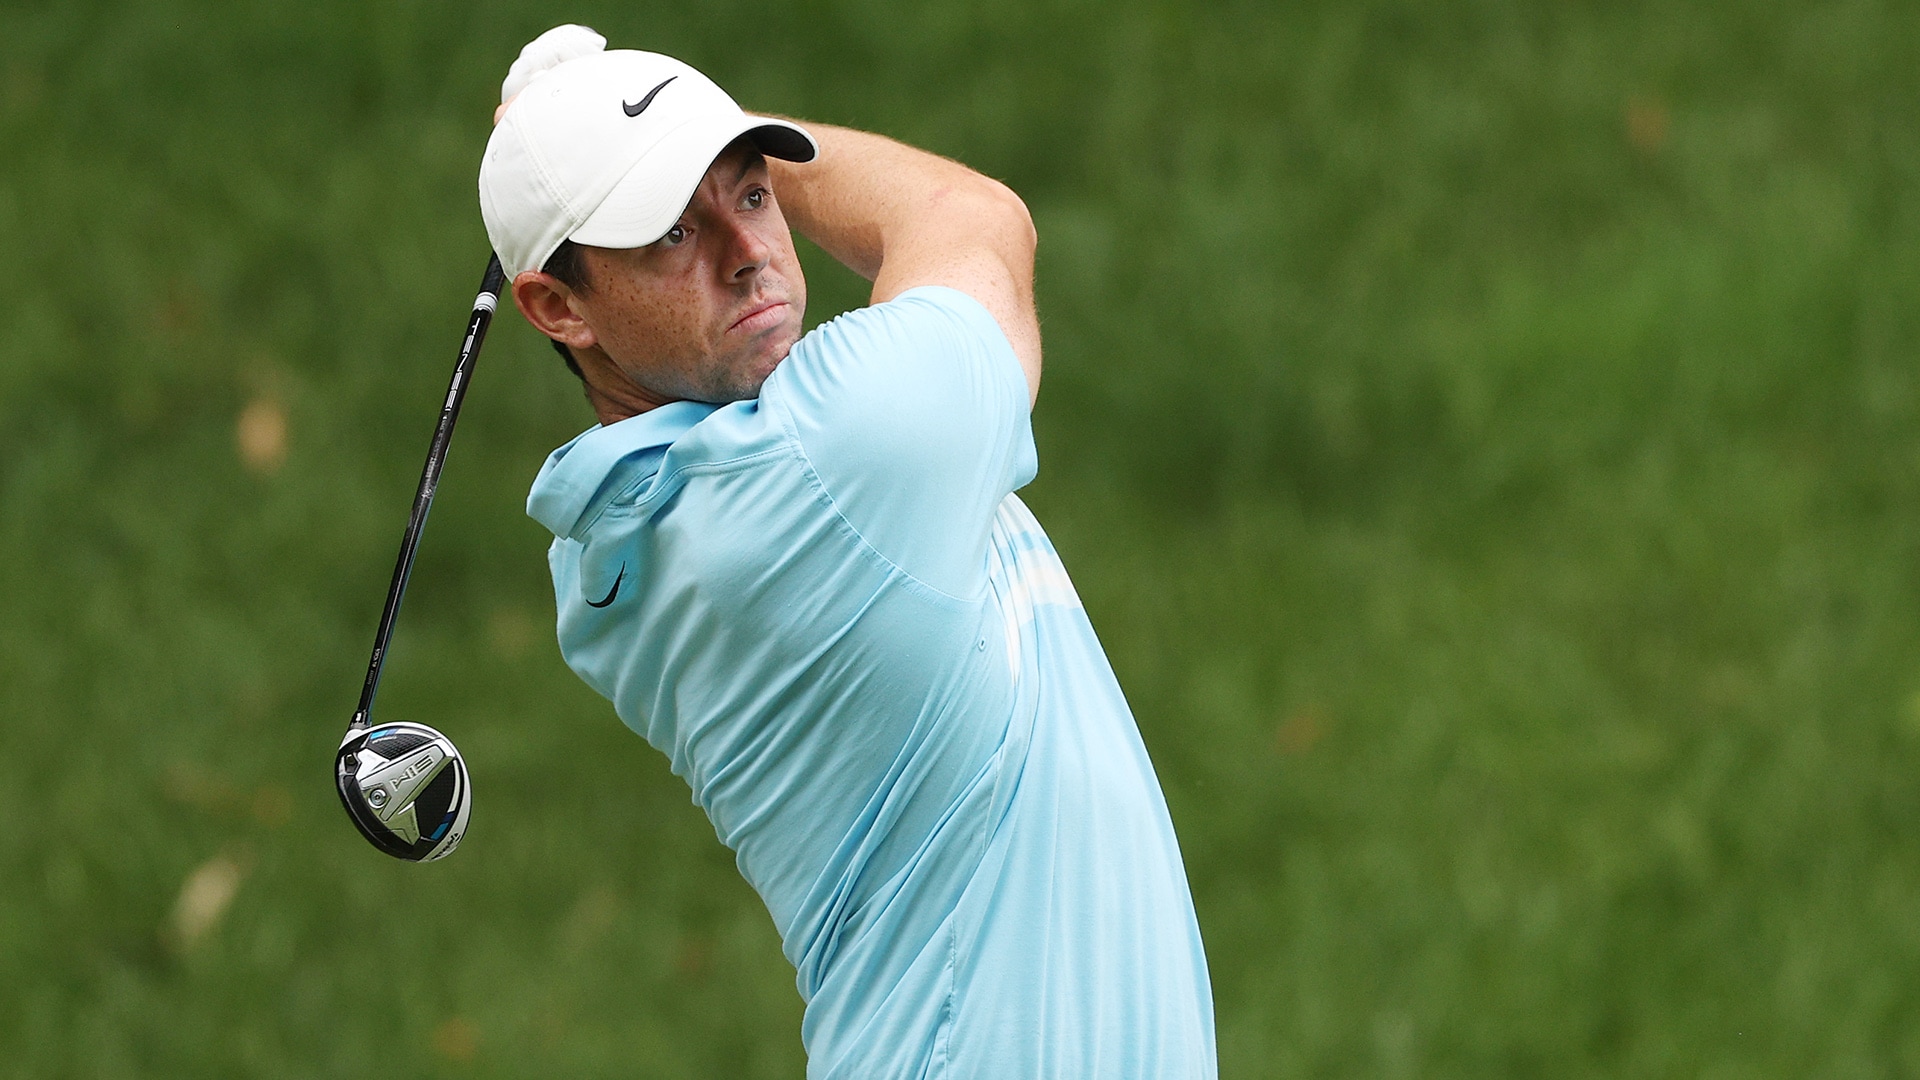 Rory McIlroy (69) still searching for rhythm after ‘disappointing day’ at Travelers